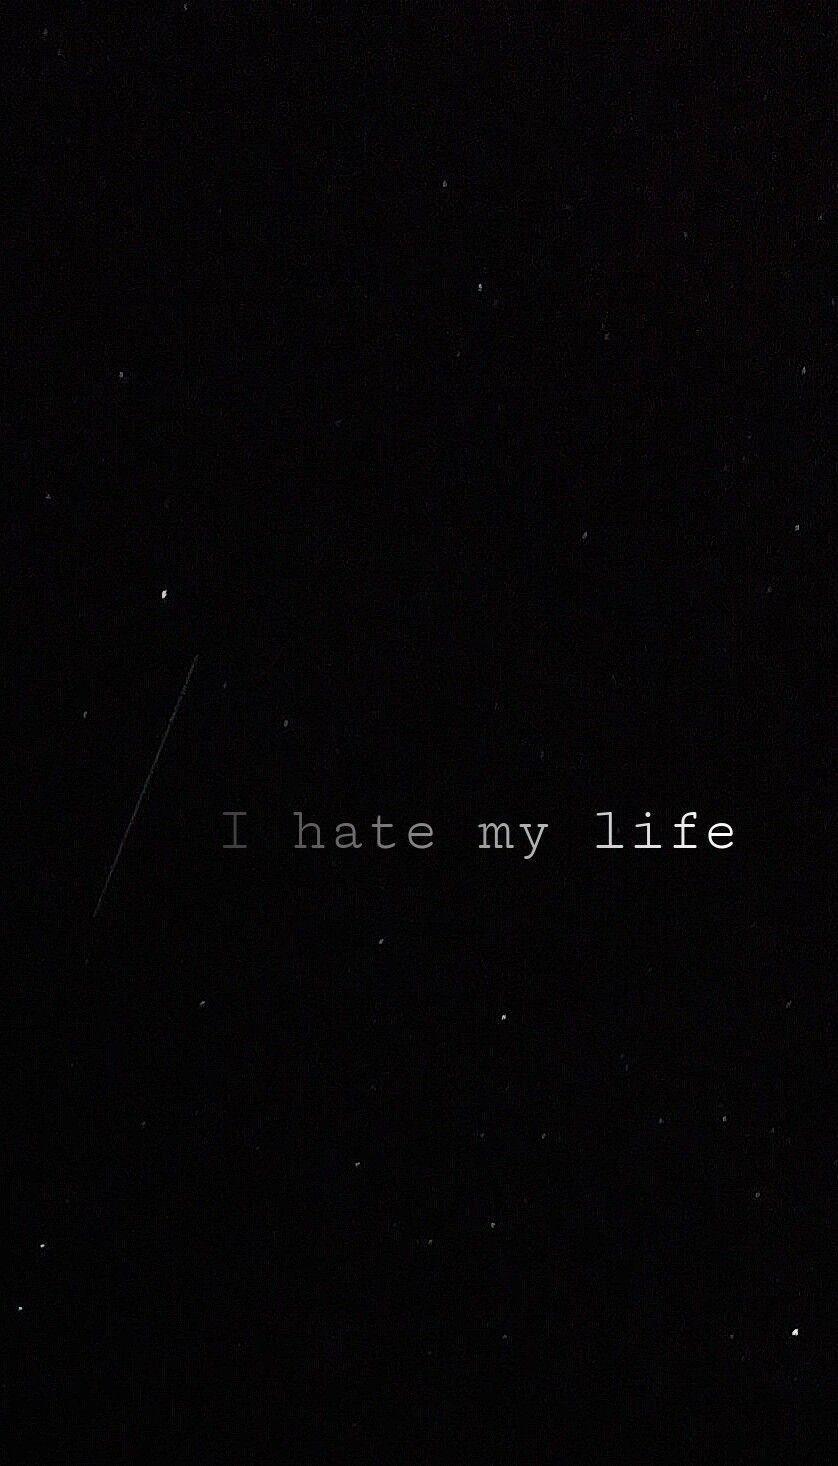 Hate me but dont HD wallpaper  Wallpaper Flare